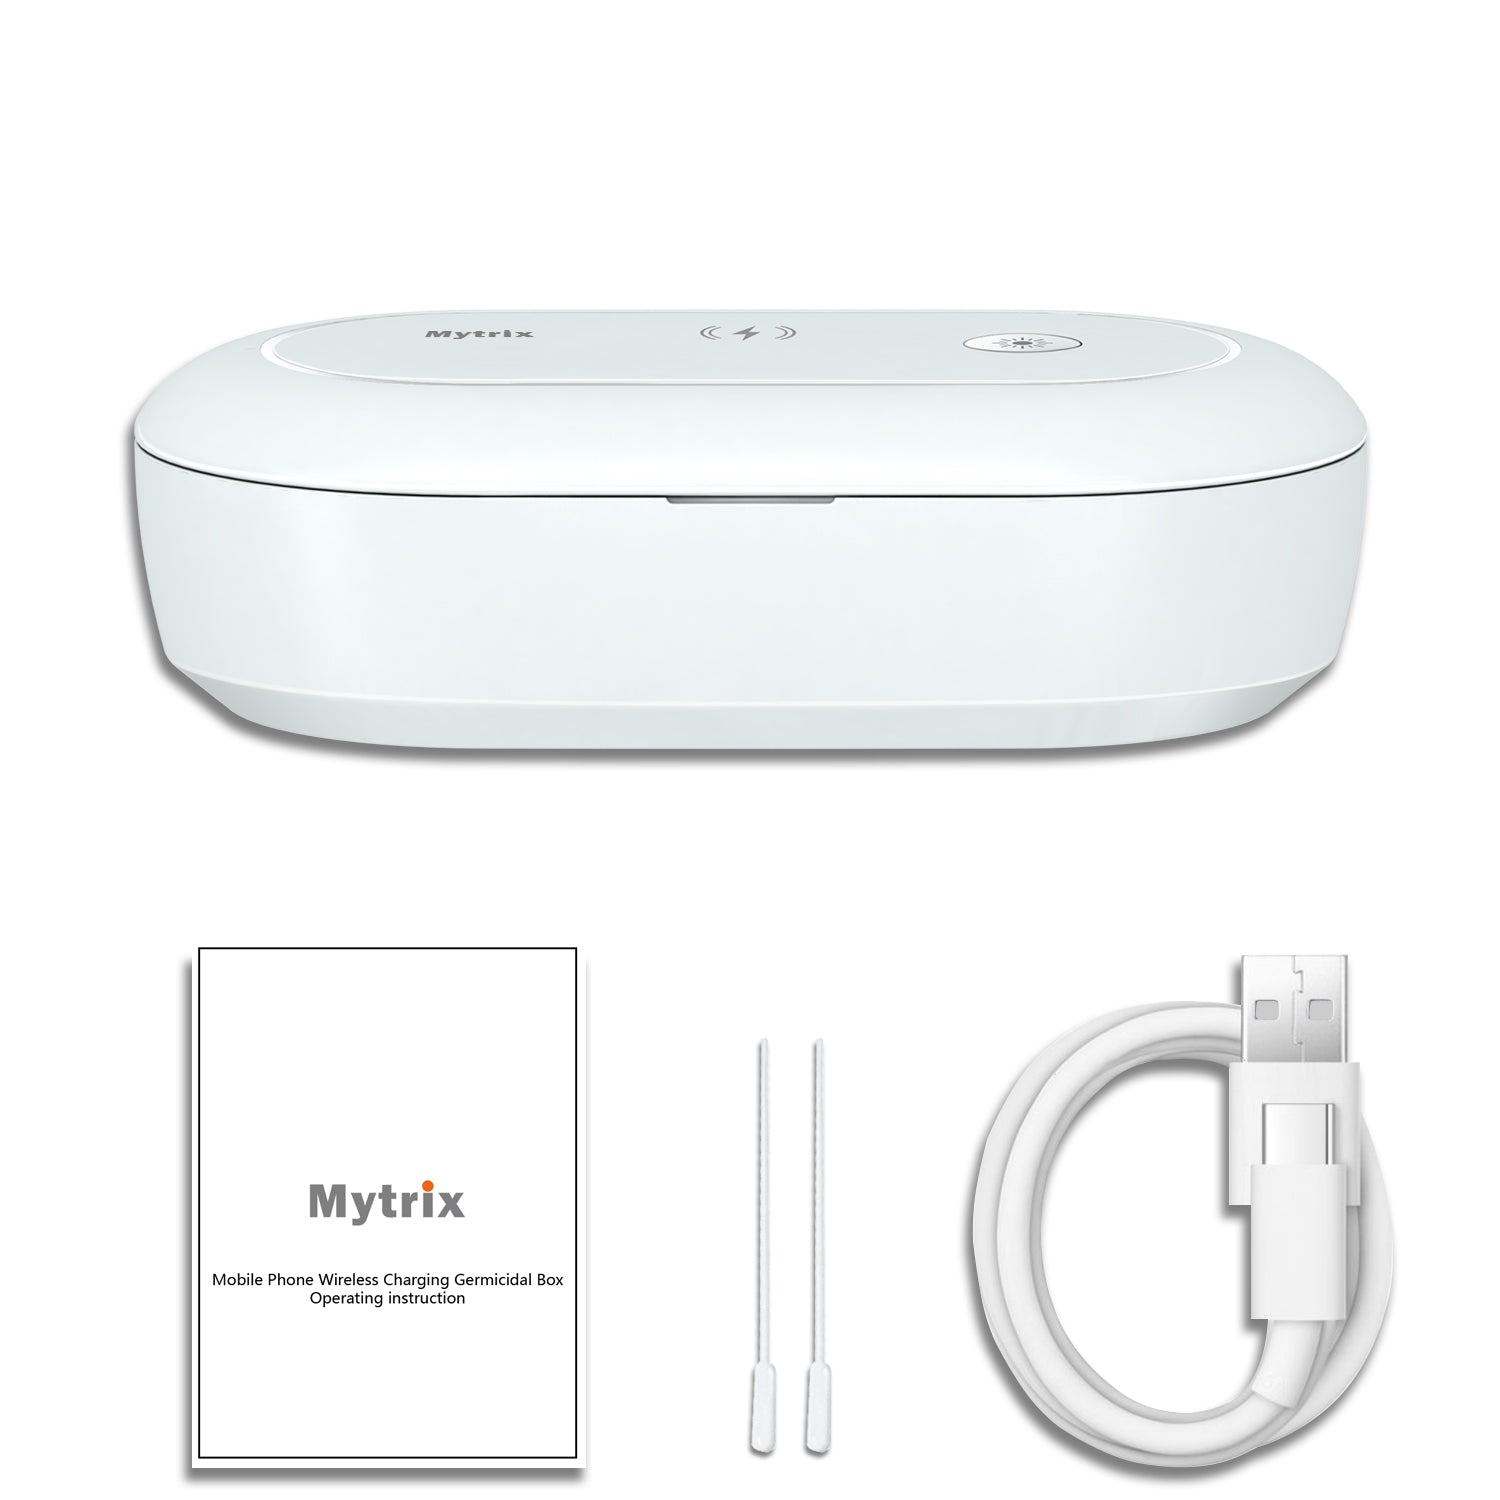 Mytrix Portable UV Sterilizer Box, Ozone Sanitization, Wireless Fast Charging Box with Aroma Diffuser, Multi-functional Box for Smart Phone, Jewelry, Glasses, Watches, 2 year Warranty